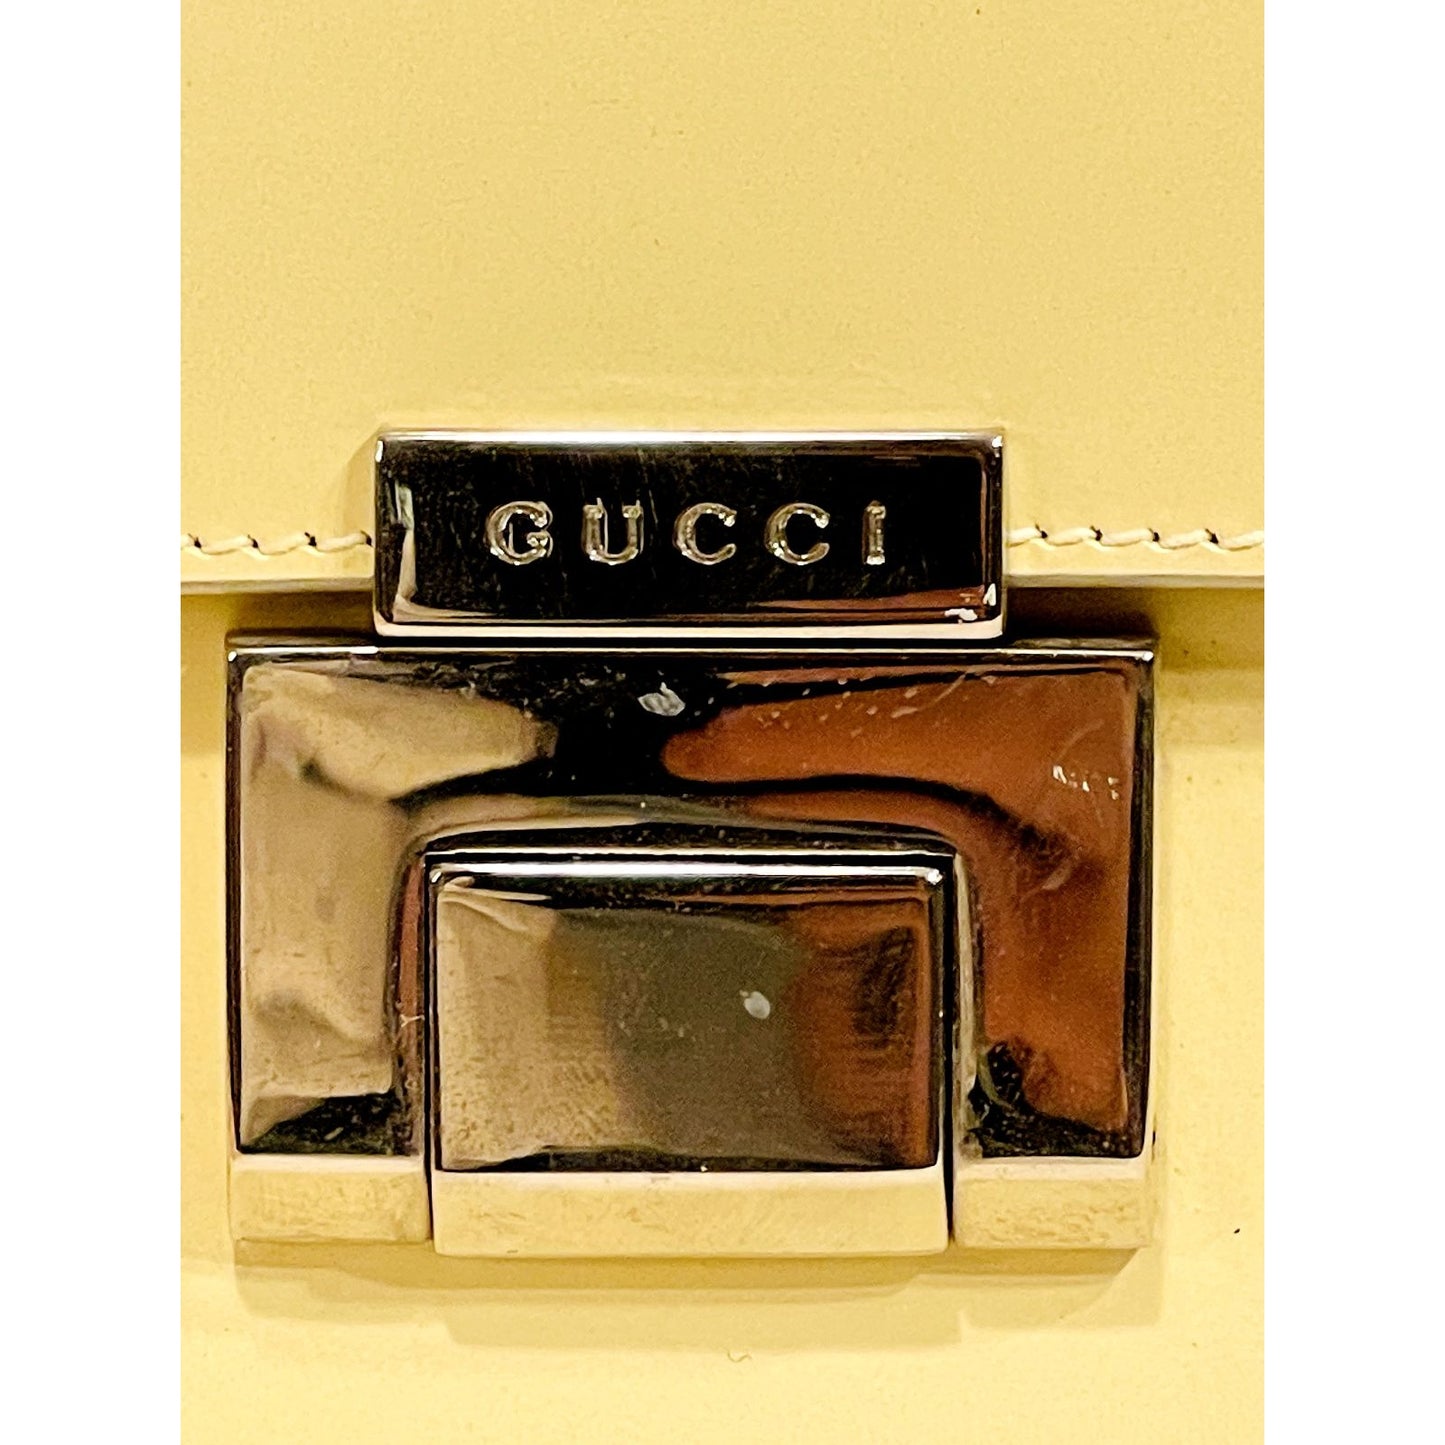 RARE, Gucci, pearly ivory/pale yellow smooth leather, Tom Ford era Padlock, two-way style with chrome hardware & removable strap